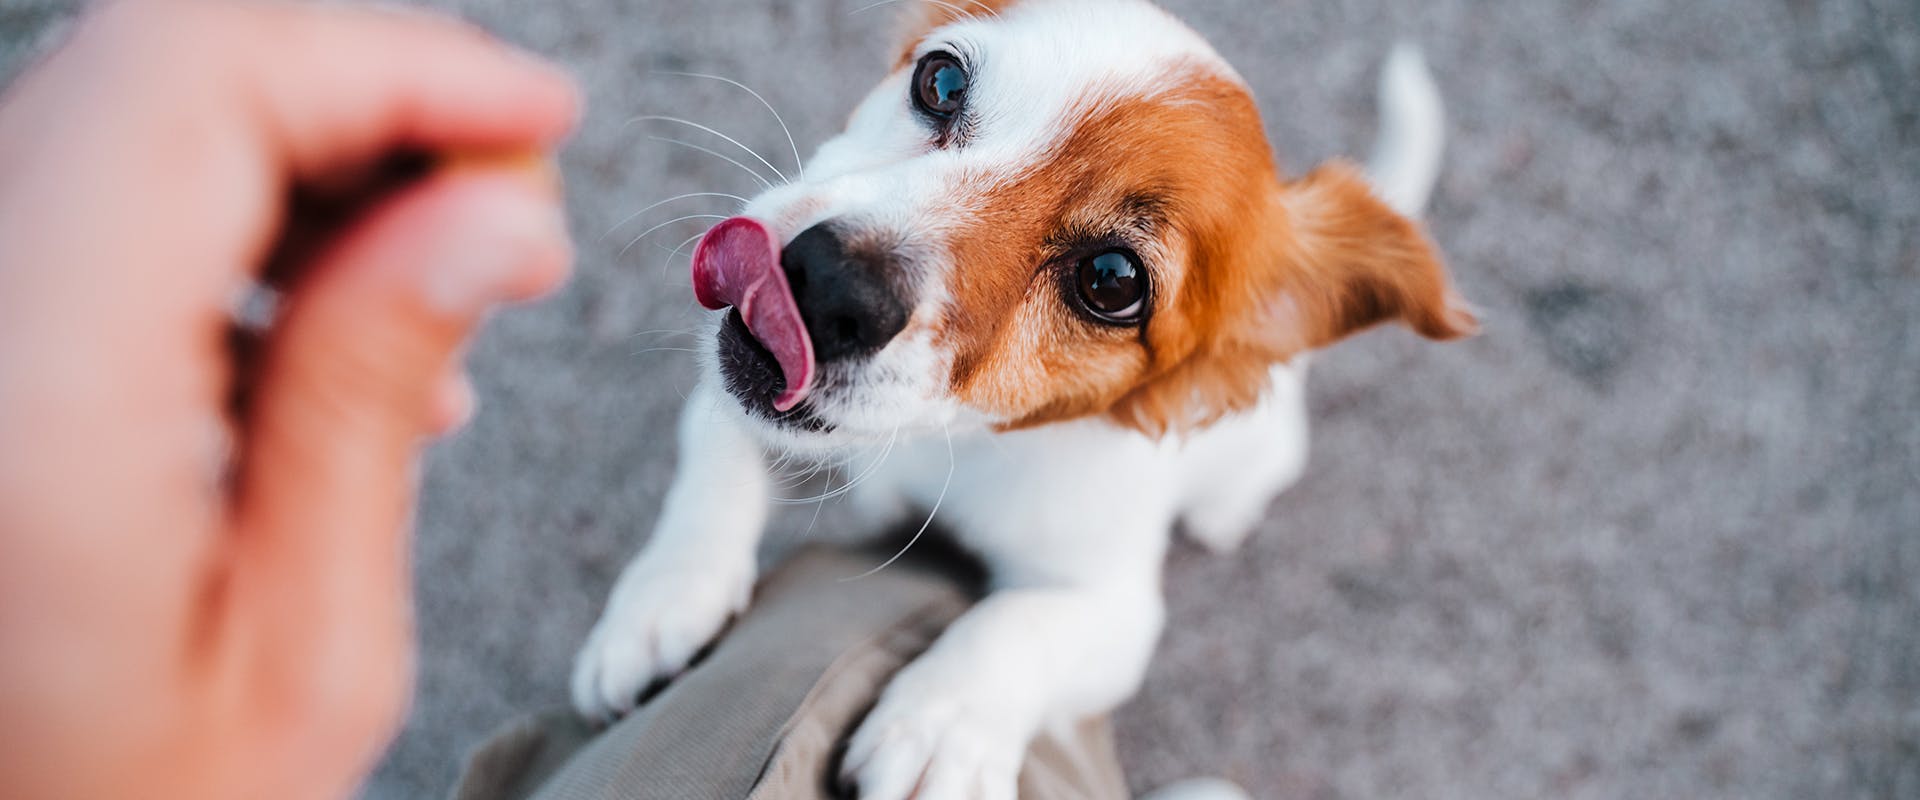 How much should I feed my dog? A cute puppy leaping up for a dog treat